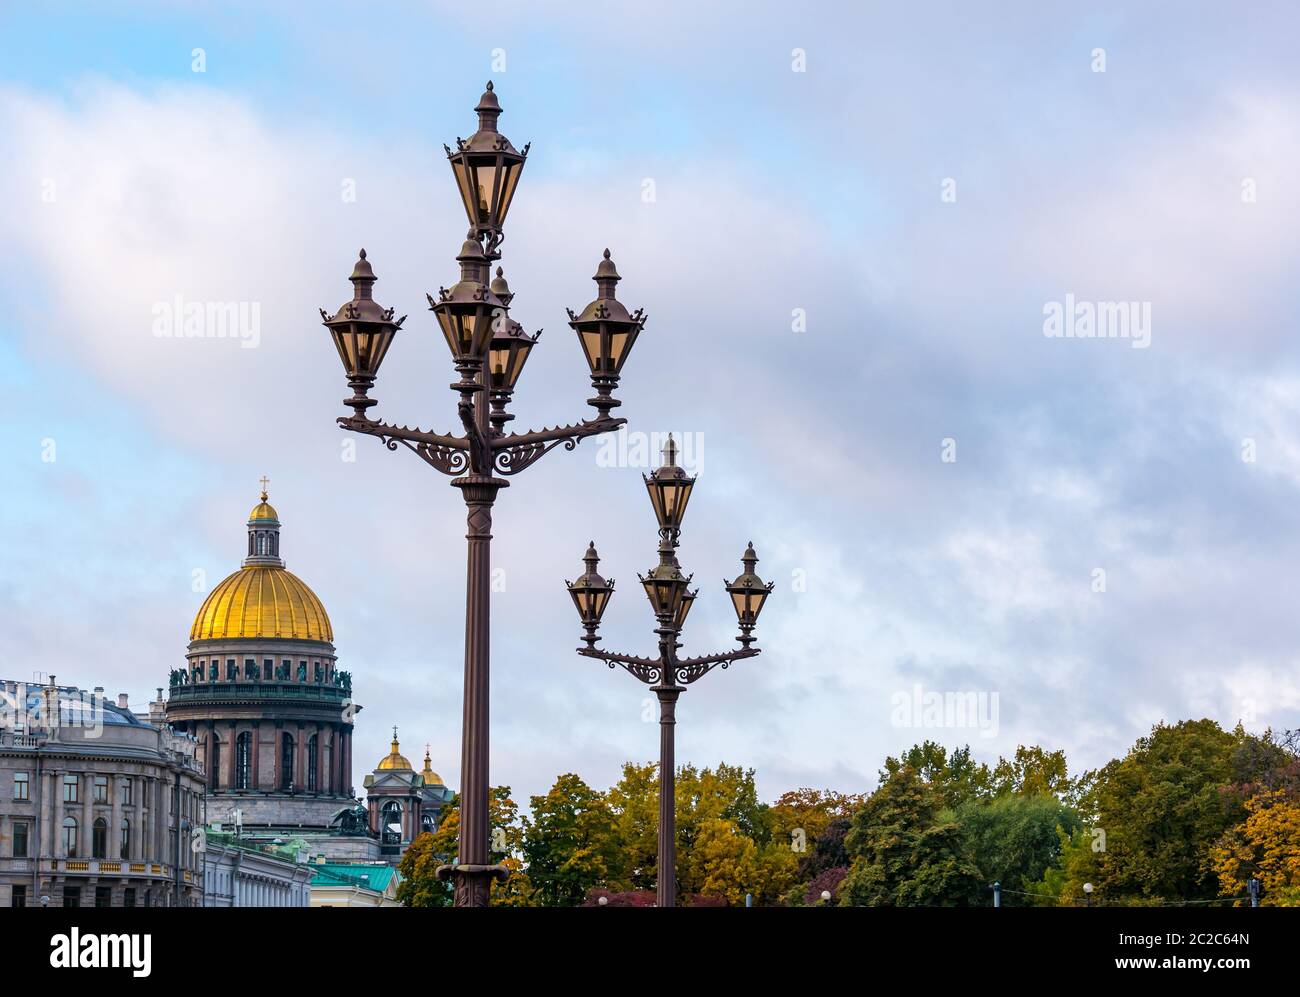 St Isaac's Cathedral dome in Autumn and ornate old fashioned streetlights, St Petersburg, Russia Stock Photo